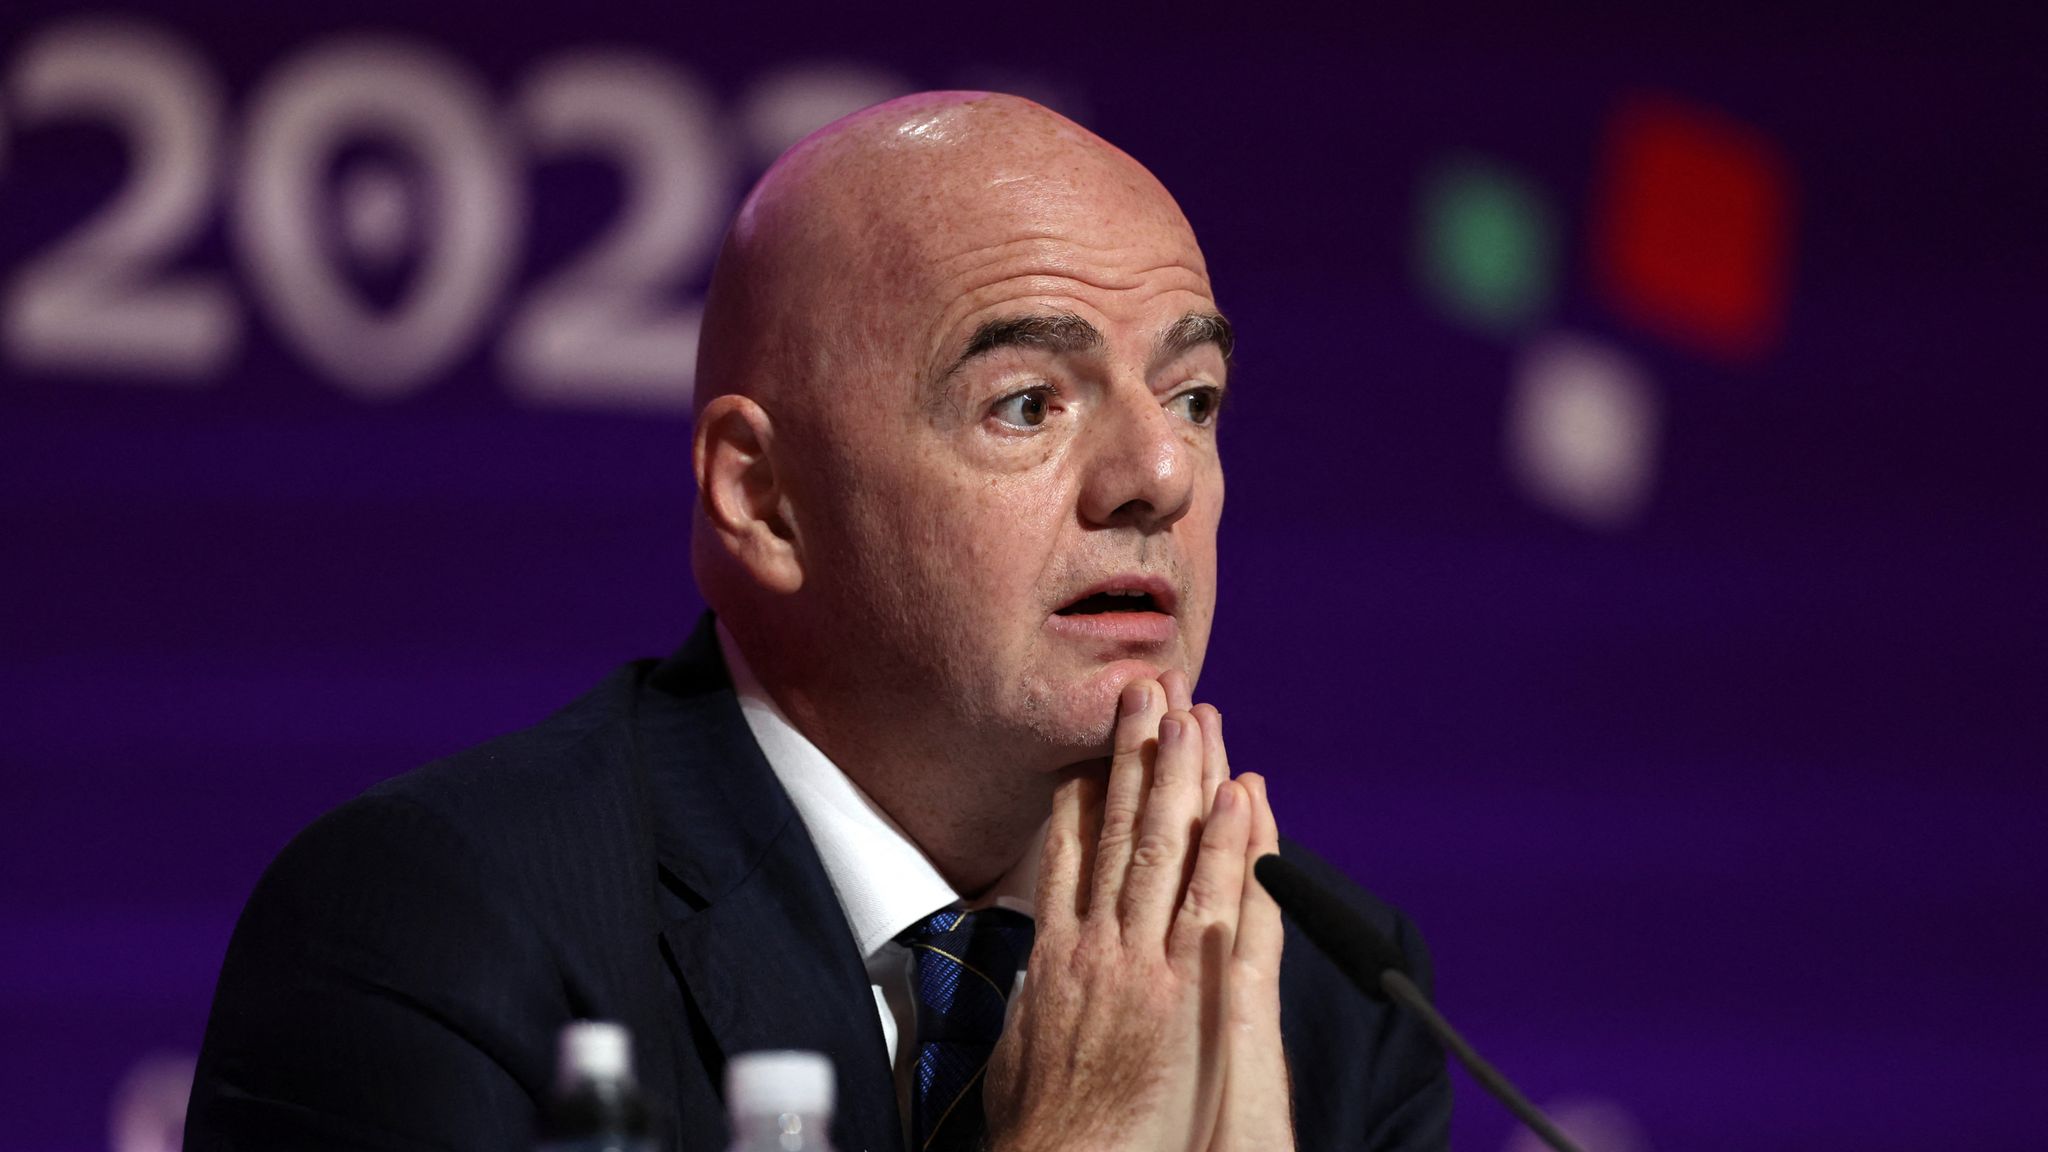 Gianni Infantino: Explosive tirade from FIFA boss threatens to overshadow  World Cup opener